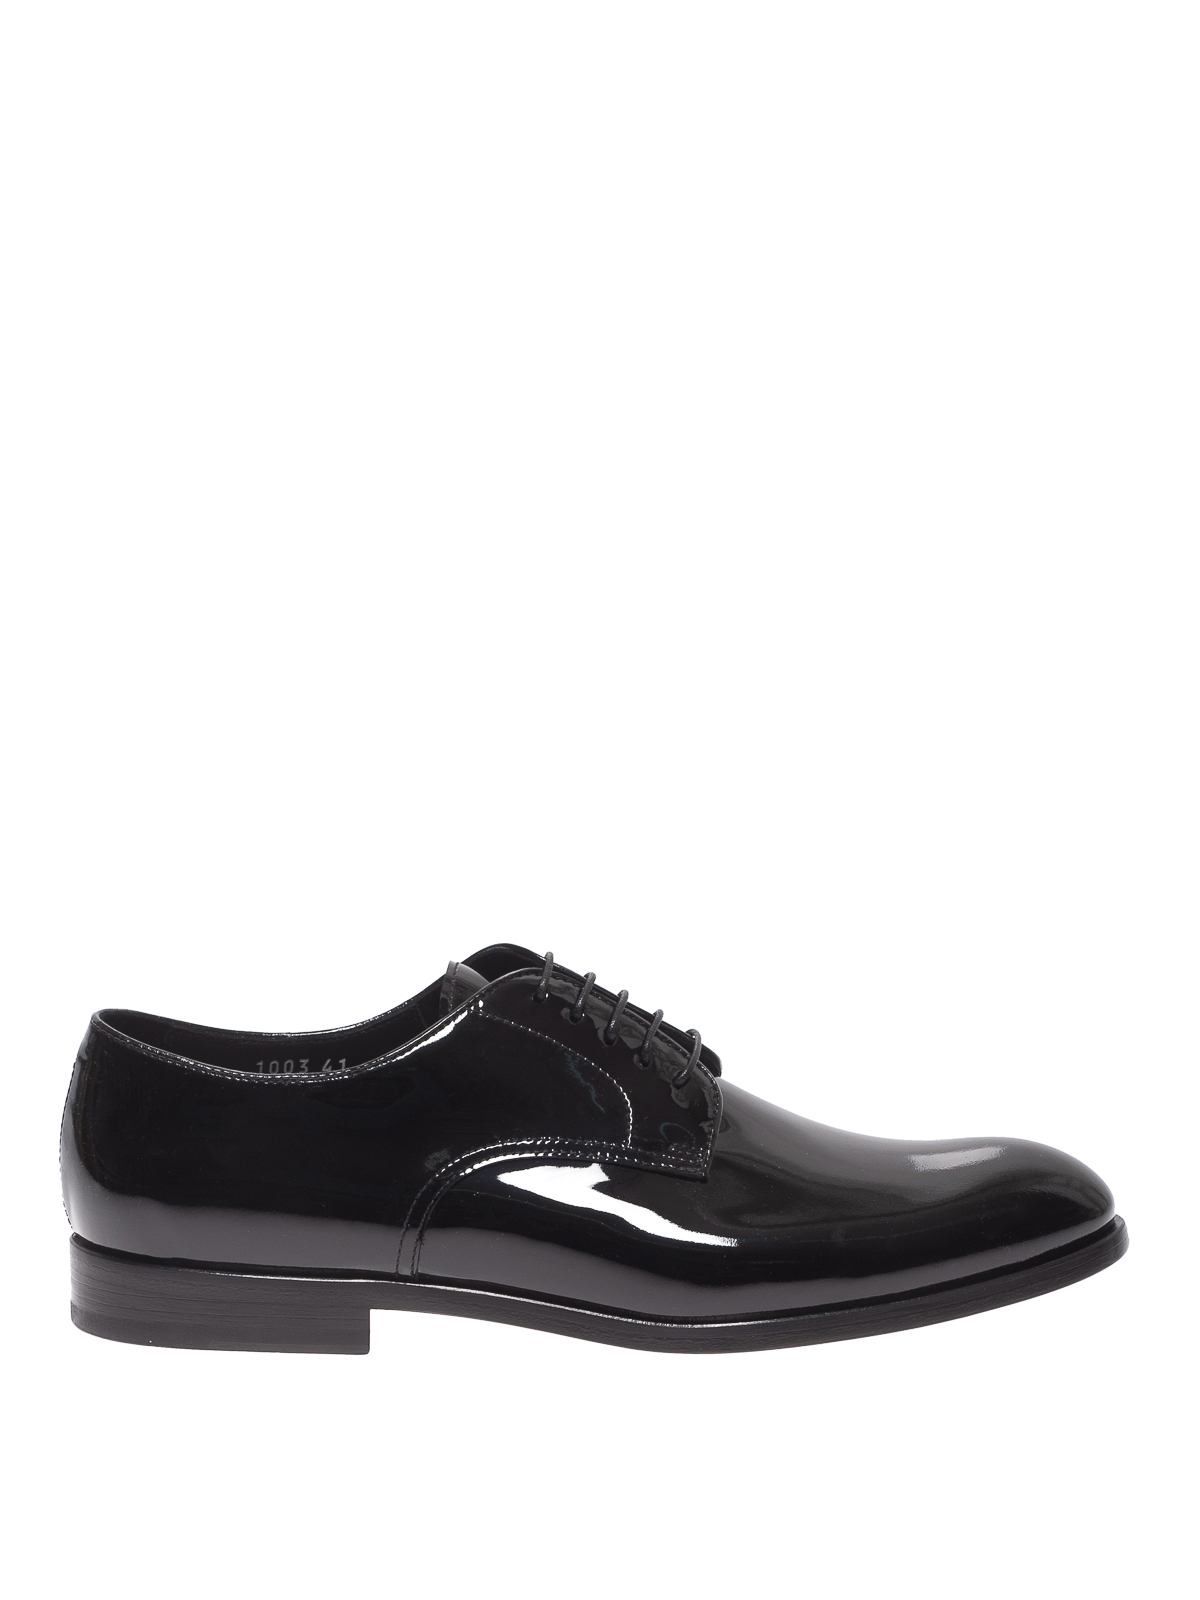 DOUCAL'S BLACK PATENT LEATHER DERBY LACE-UPS